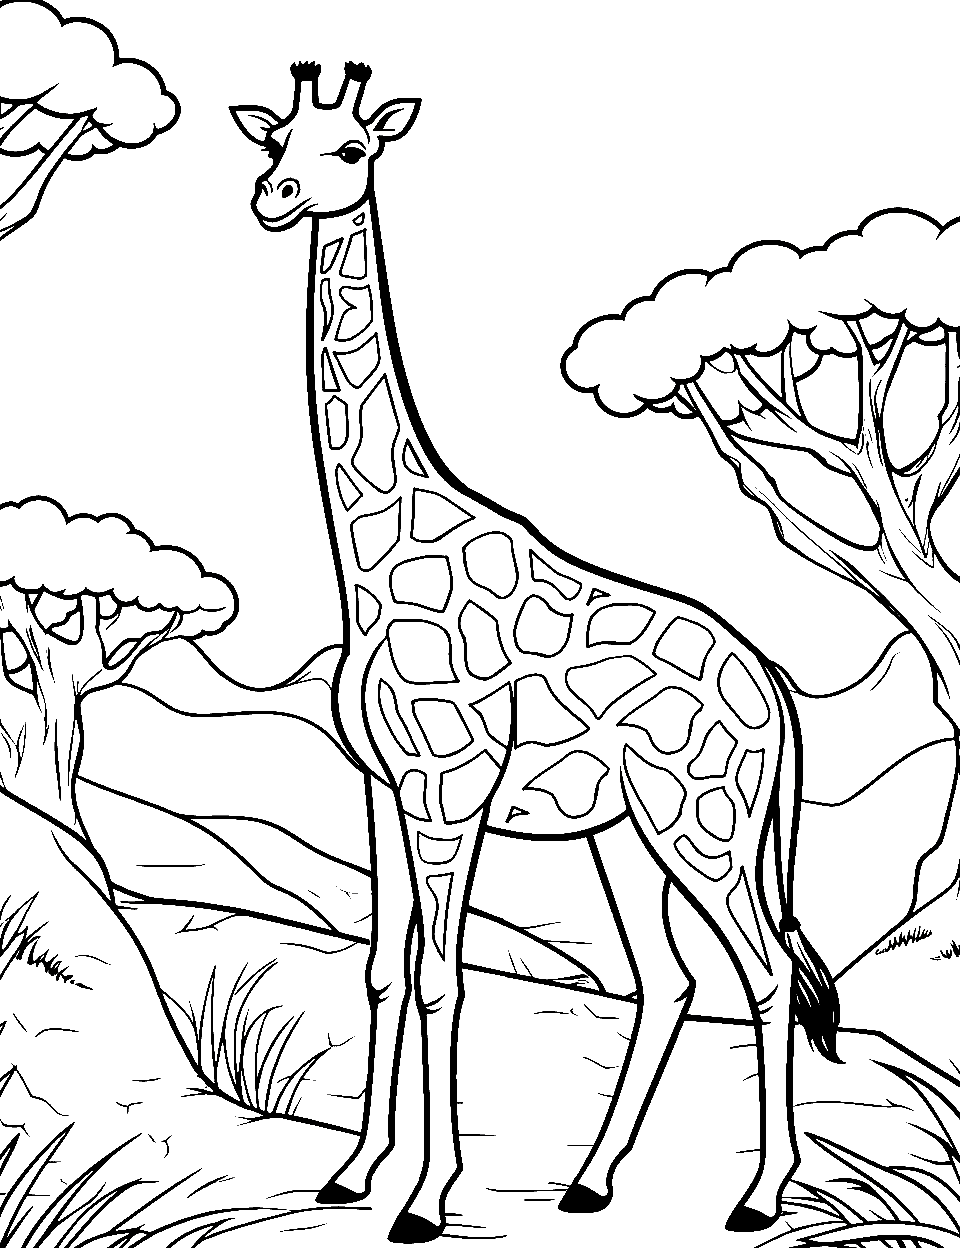 Madagascar Journey Coloring Page - A giraffe walking on the unique terrains of Madagascar.